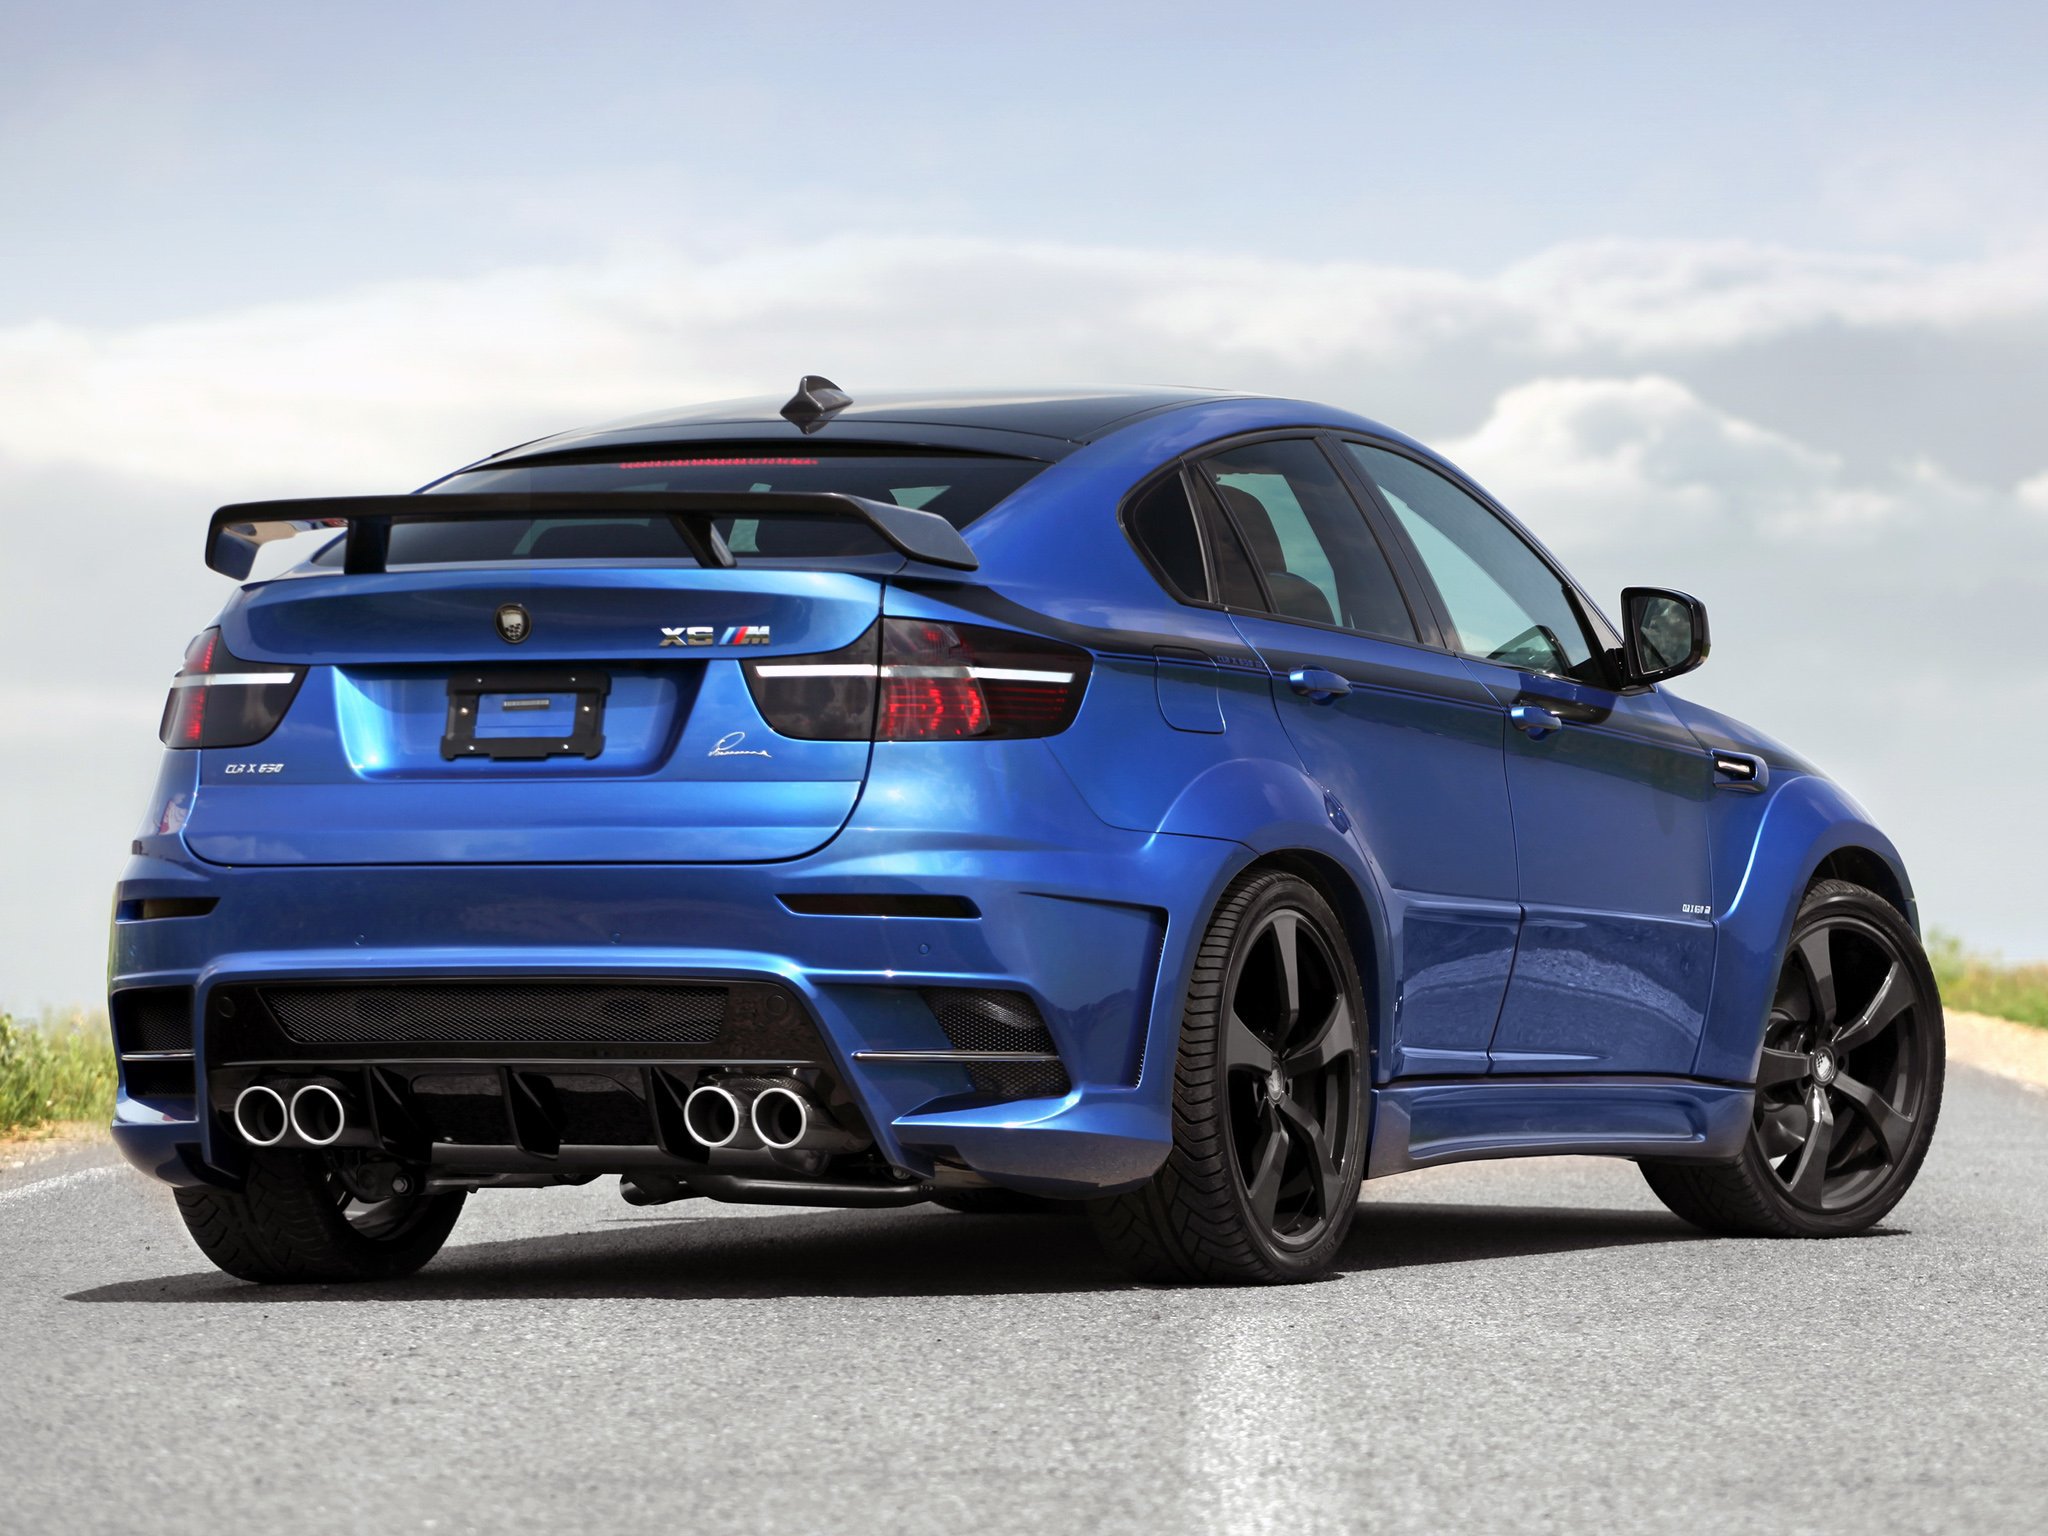 Bmw X6 Tuning Wallpaper Image Photos Pictures Background